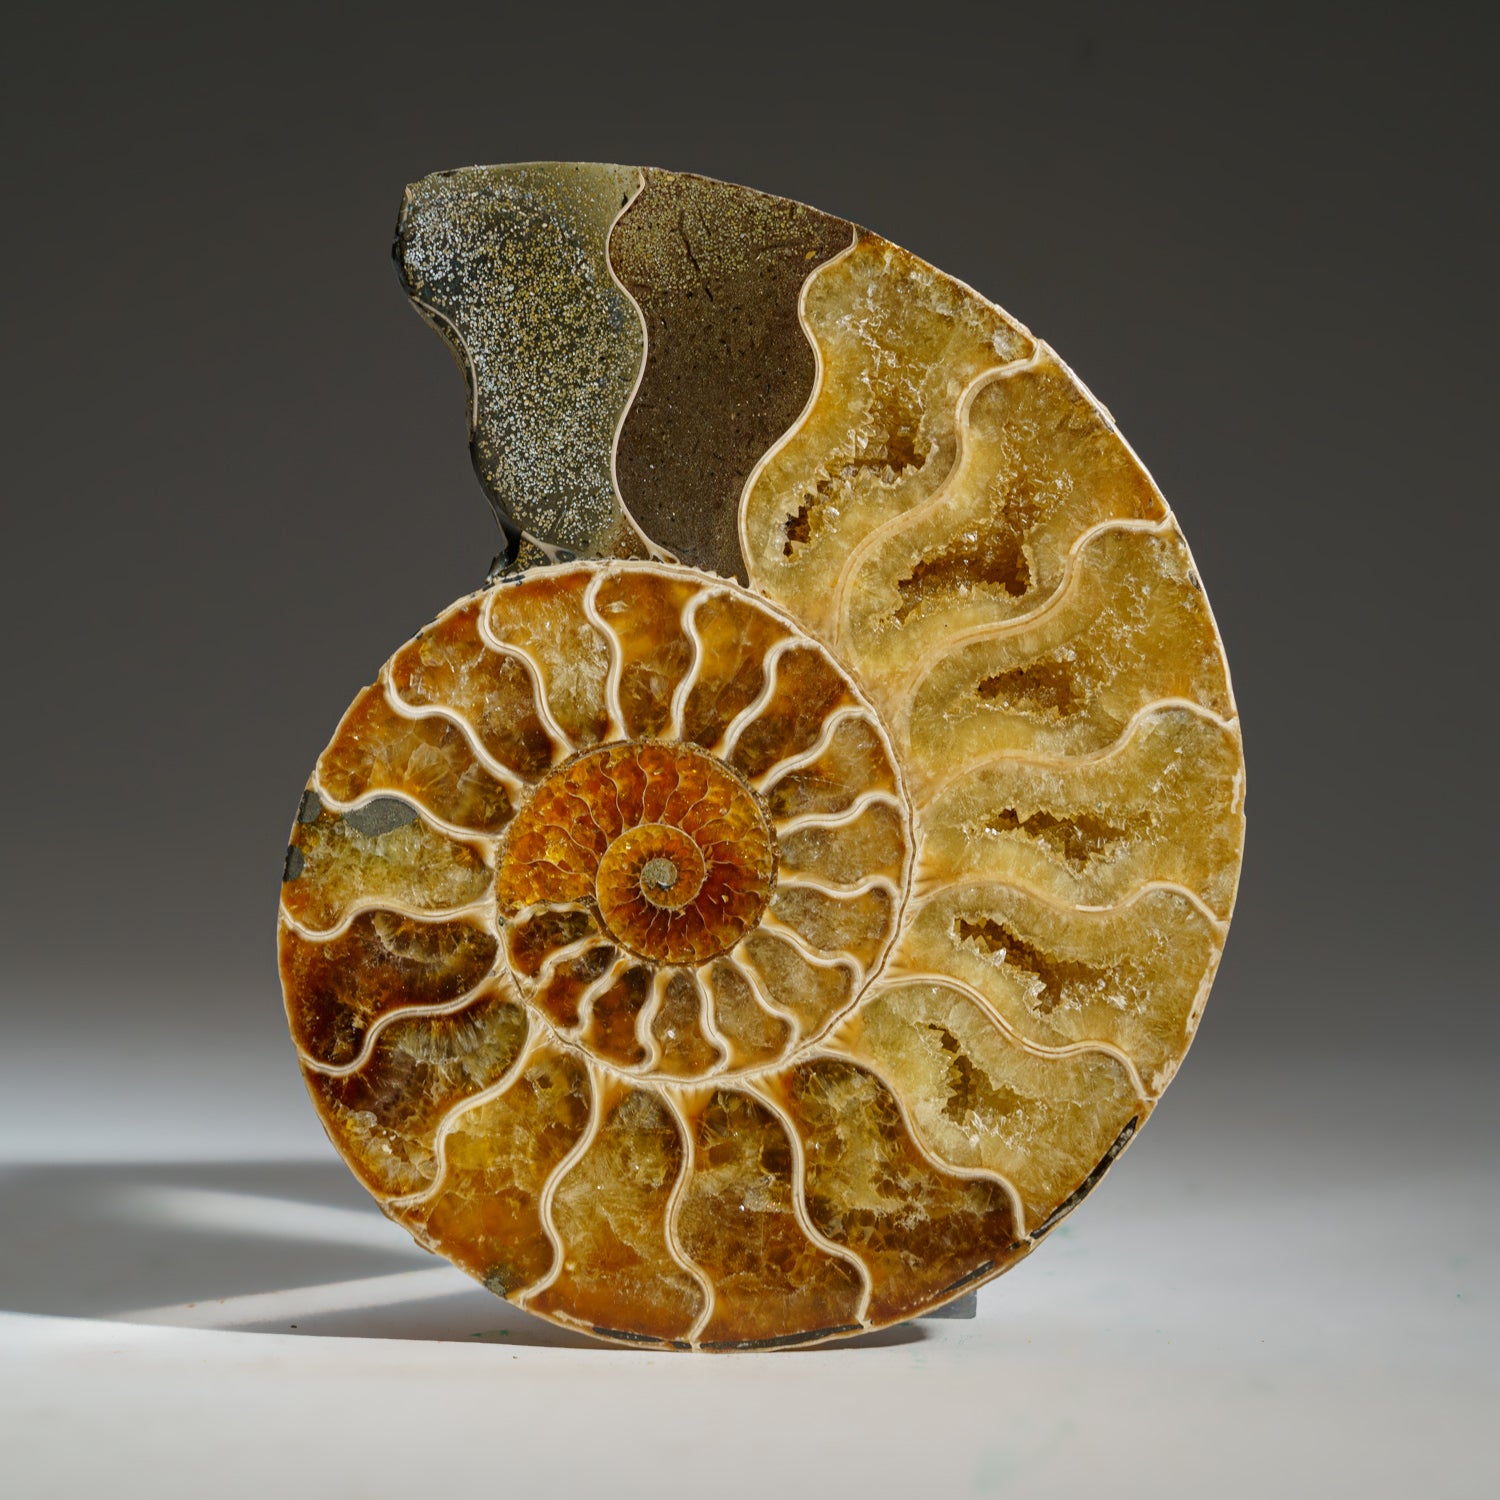 Calcified Ammonite Halve From Madagascar (275.8 grams)